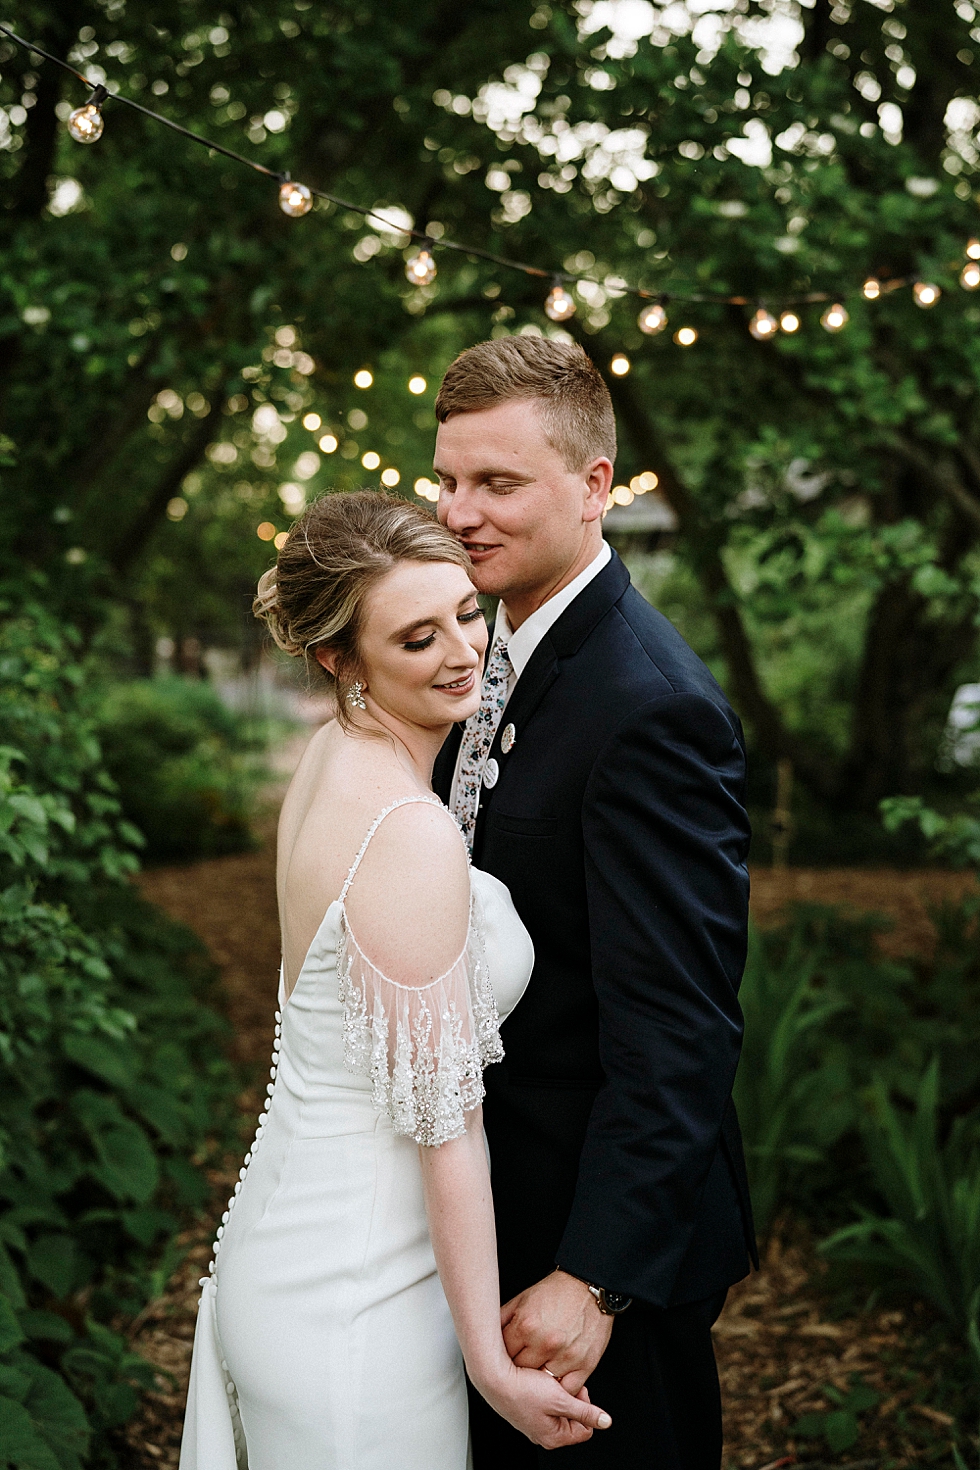  Dreamy bride and groom so in love at this spring wedding in Louisville Kentucky at Locust Grove. spring wedding dress Locust Grove Louisville photographer Kentucky wedding photography by Lauren outdoor wedding bride and groom black suit dreamy outdo